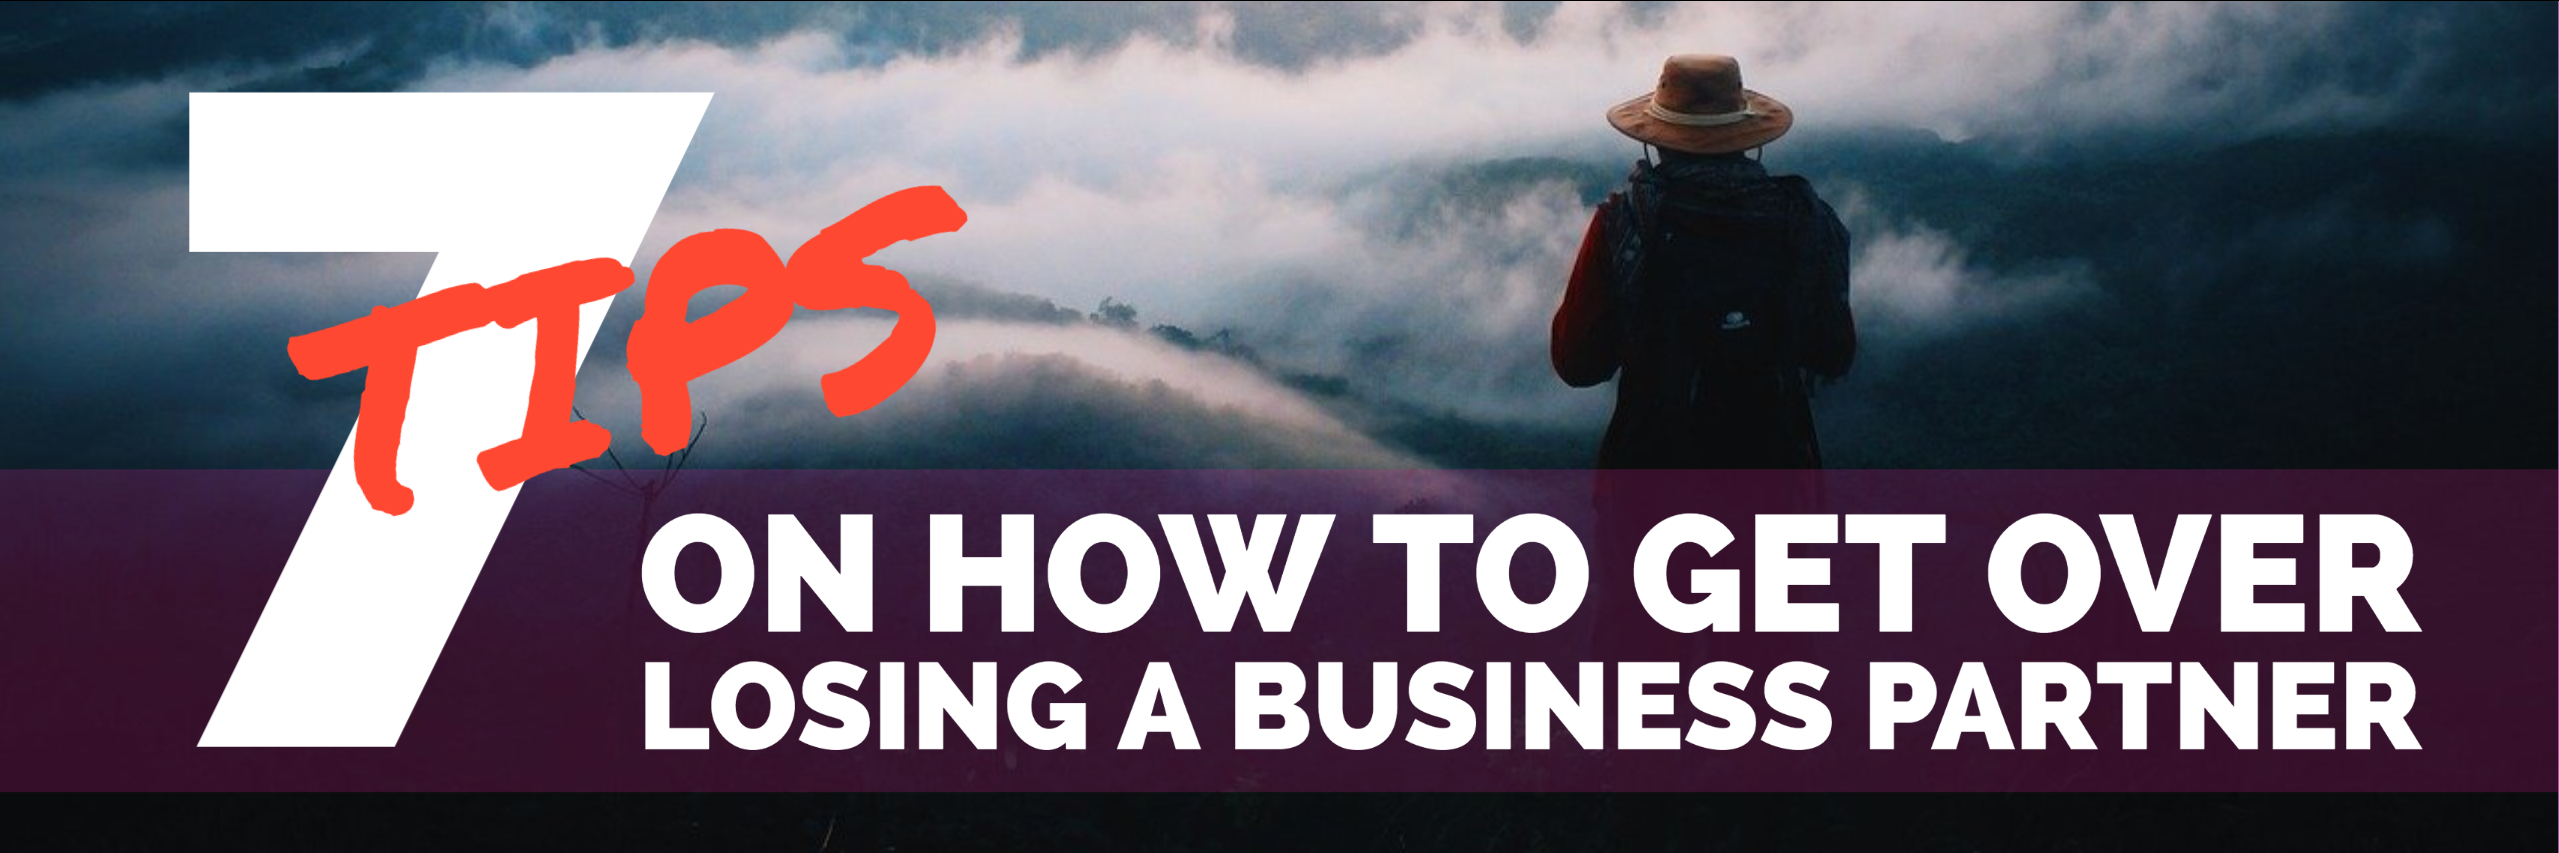 7 TIPS ON HOW TO GET OVER LOSING A BUSINESS PARTNER global sales coach global sales consultant increase sales best selling author motivational speaker corporate consulting paul argueta